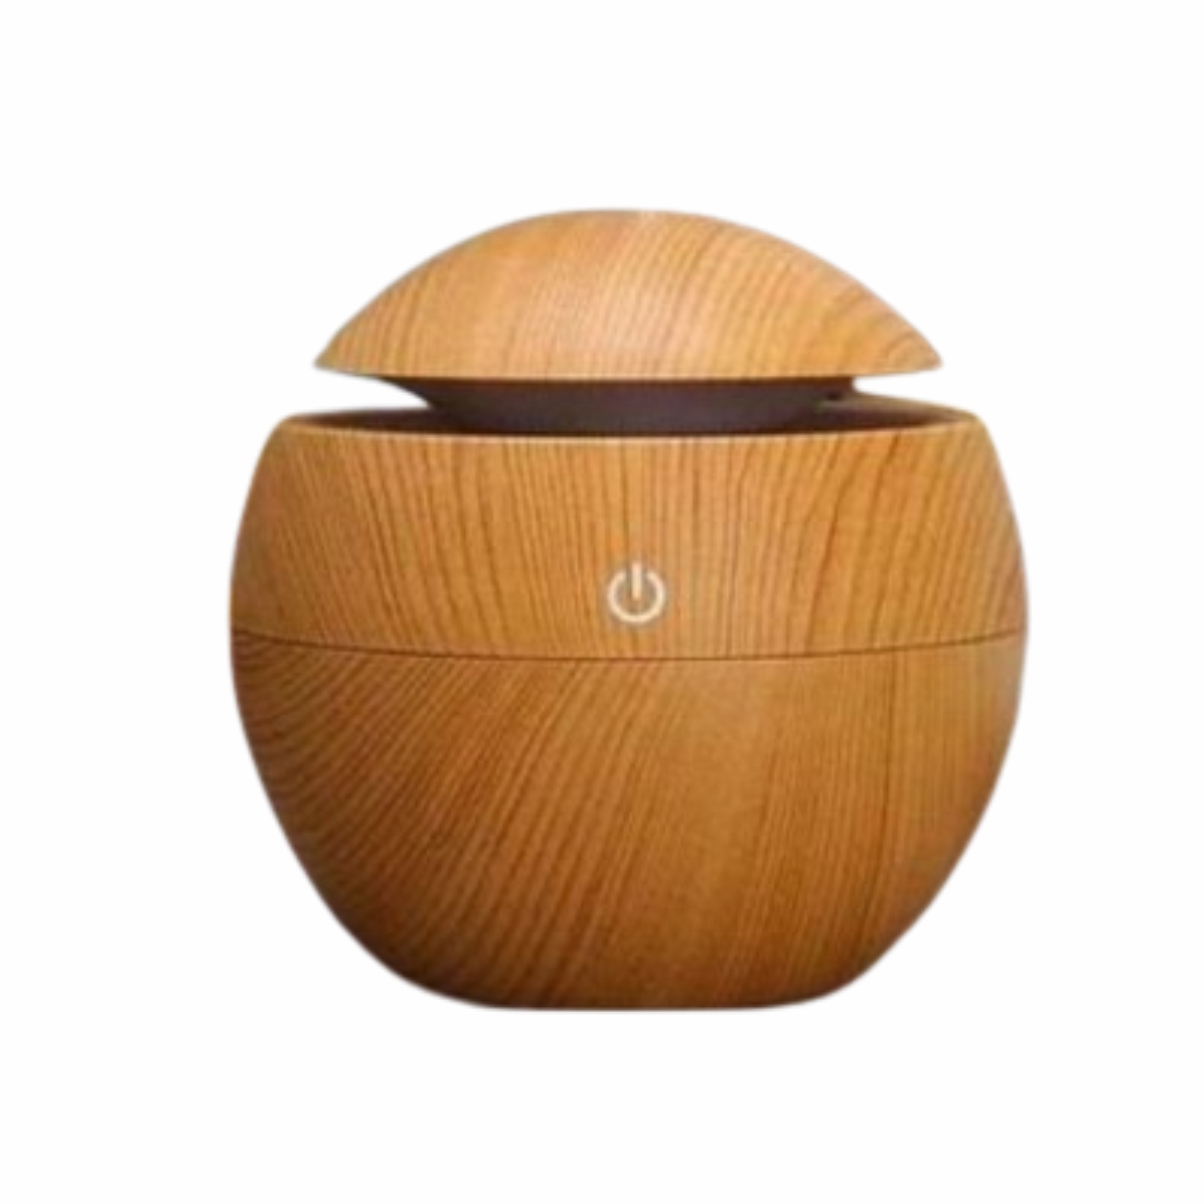 Room Mini Portable Wood Aromatherapy Humidifier - 4-in-1  Diffuser, Humidifier, Air Purifier, LED Night Light